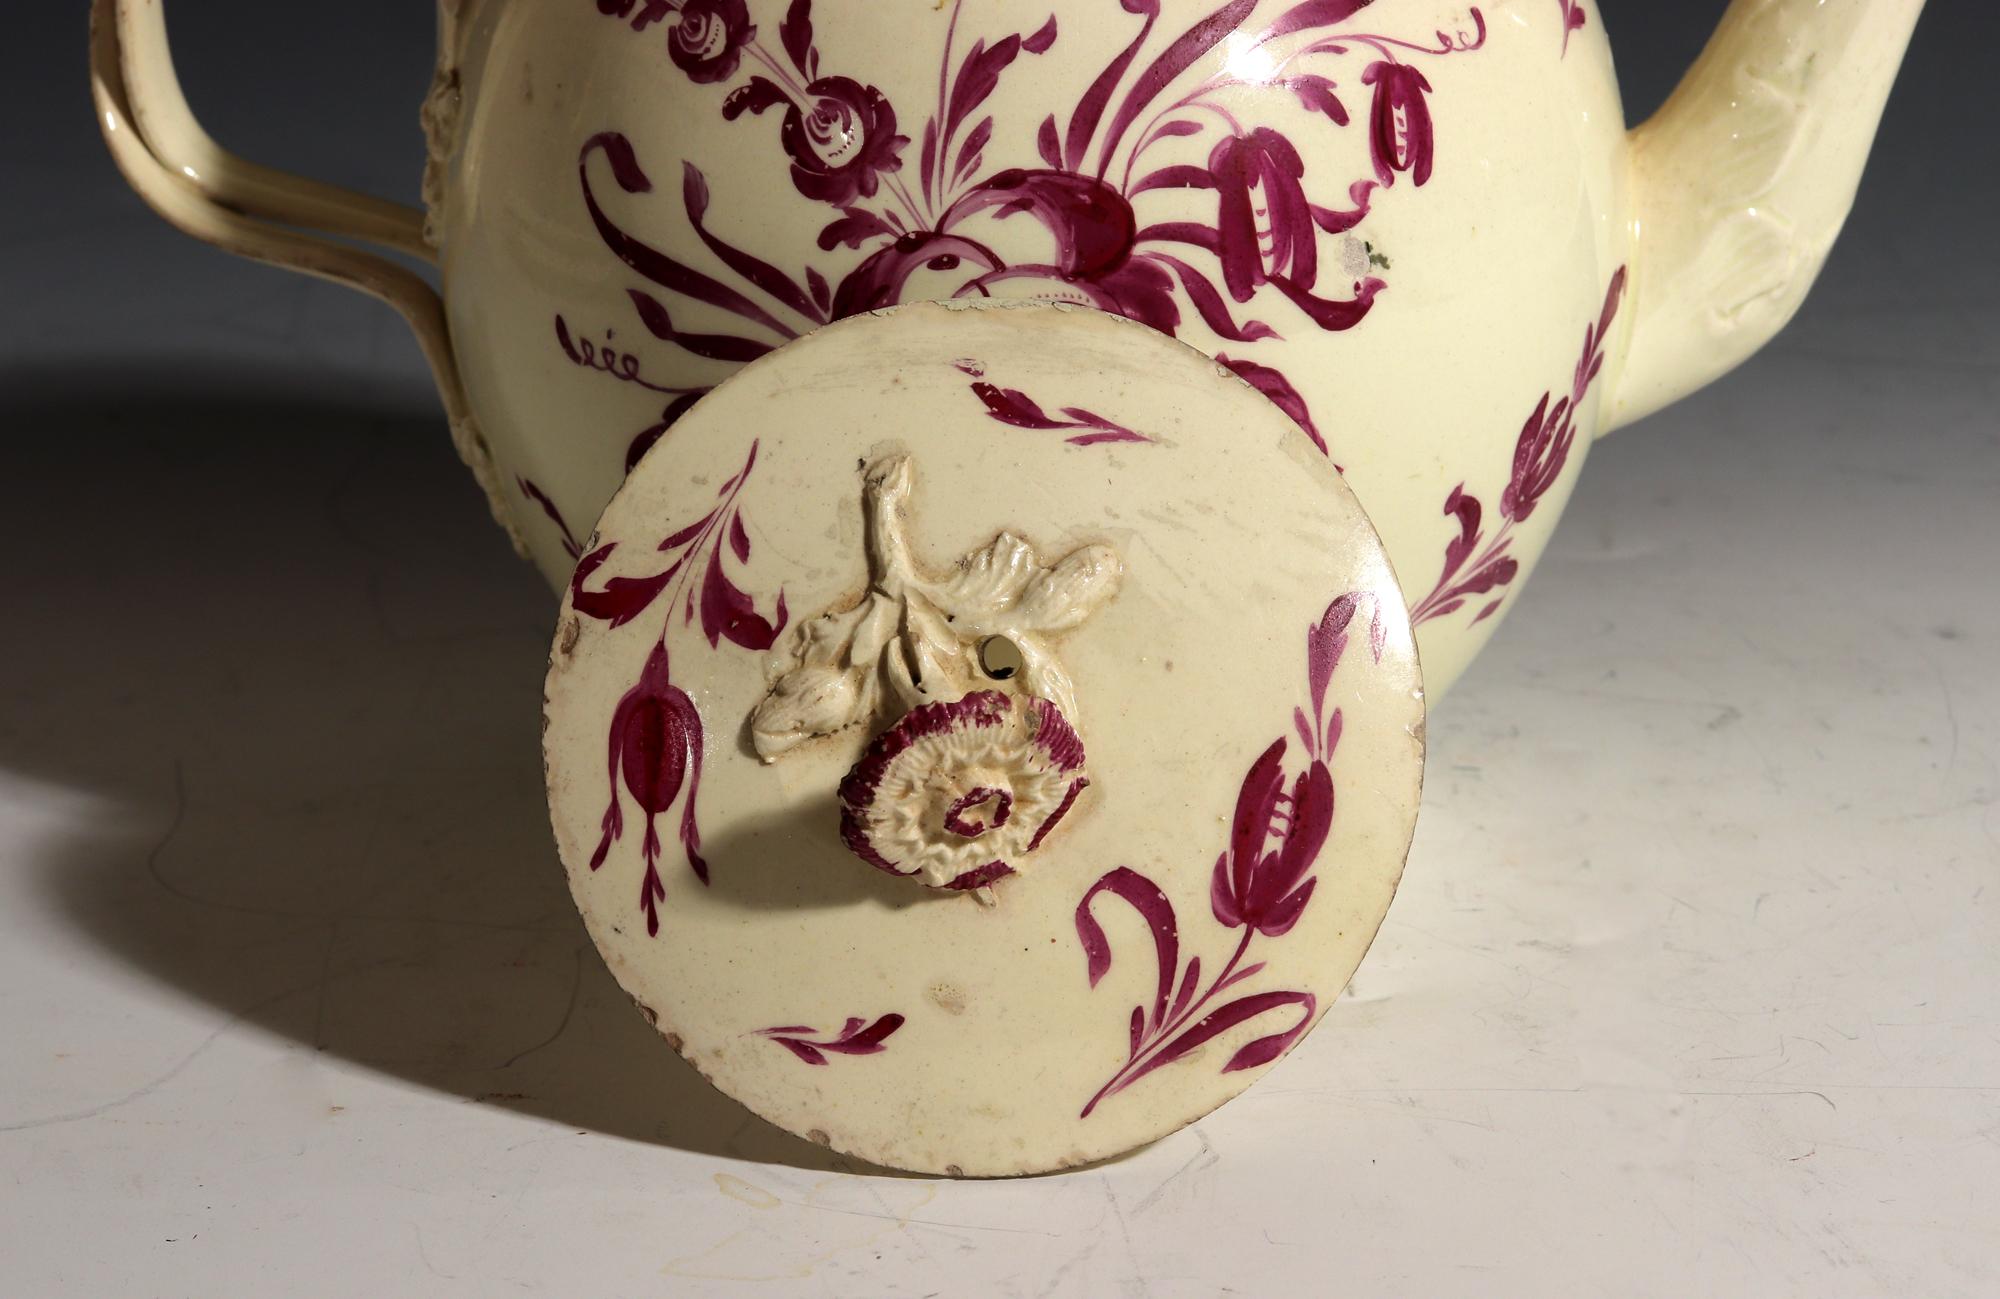 English Creamware Large Teapot with Puce Flower Painted Decoration,
circa 1770

 The Staffordshire Globular teapot is painted with large puce-colored flowers with a bouquet to each side, and other scattered leaves on the sides and the cover. The